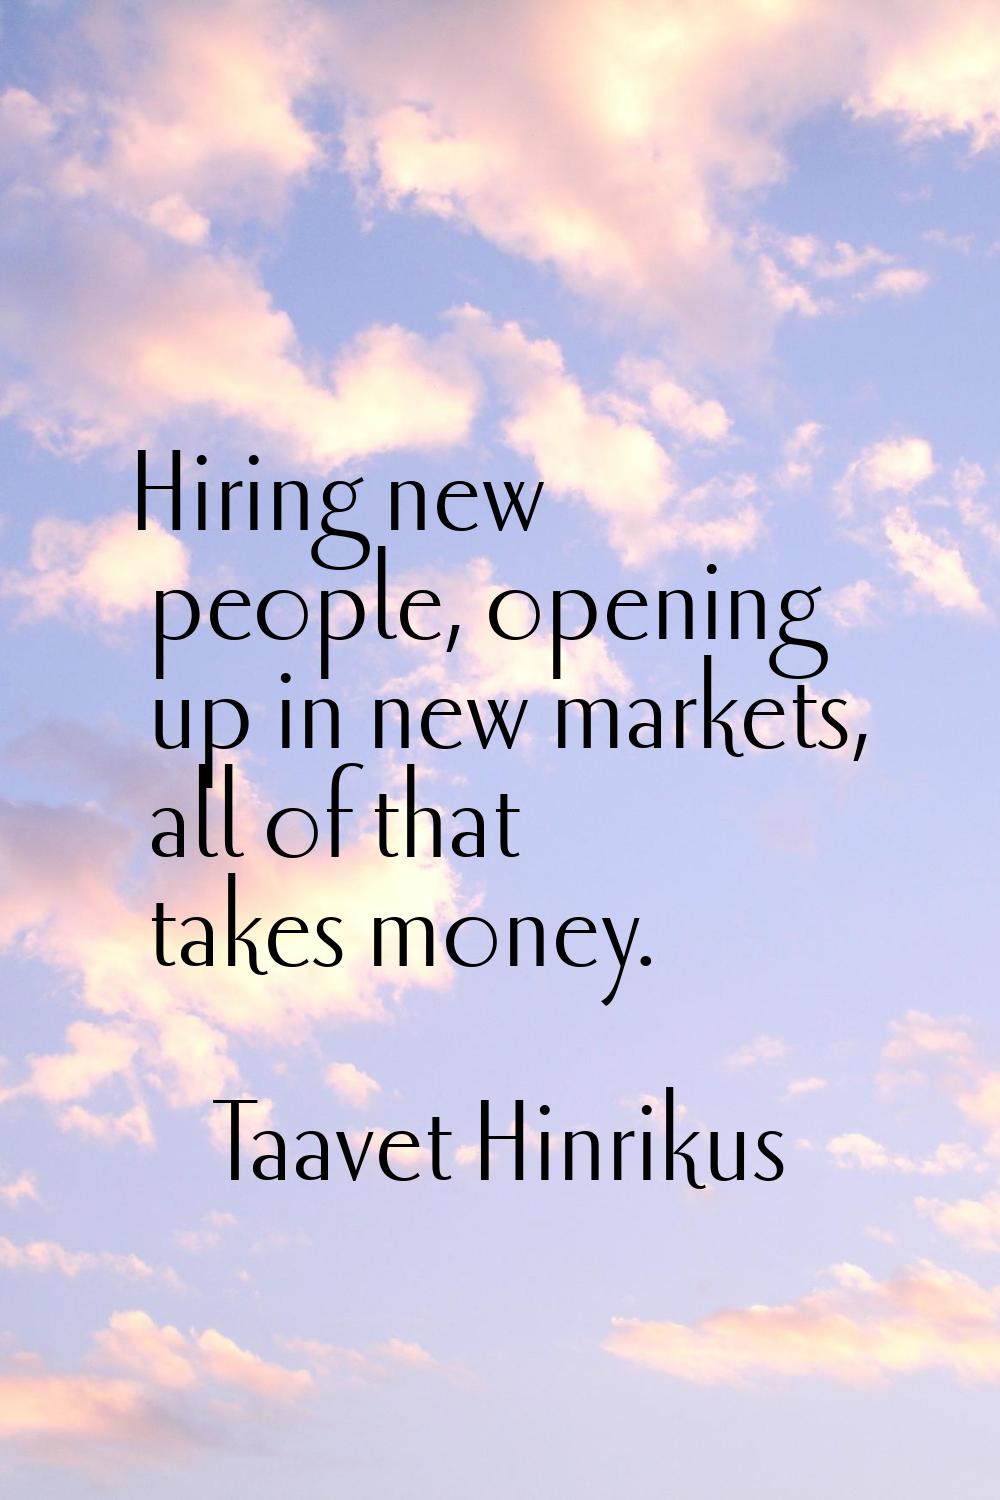 Hiring new people, opening up in new markets, all of that takes money.